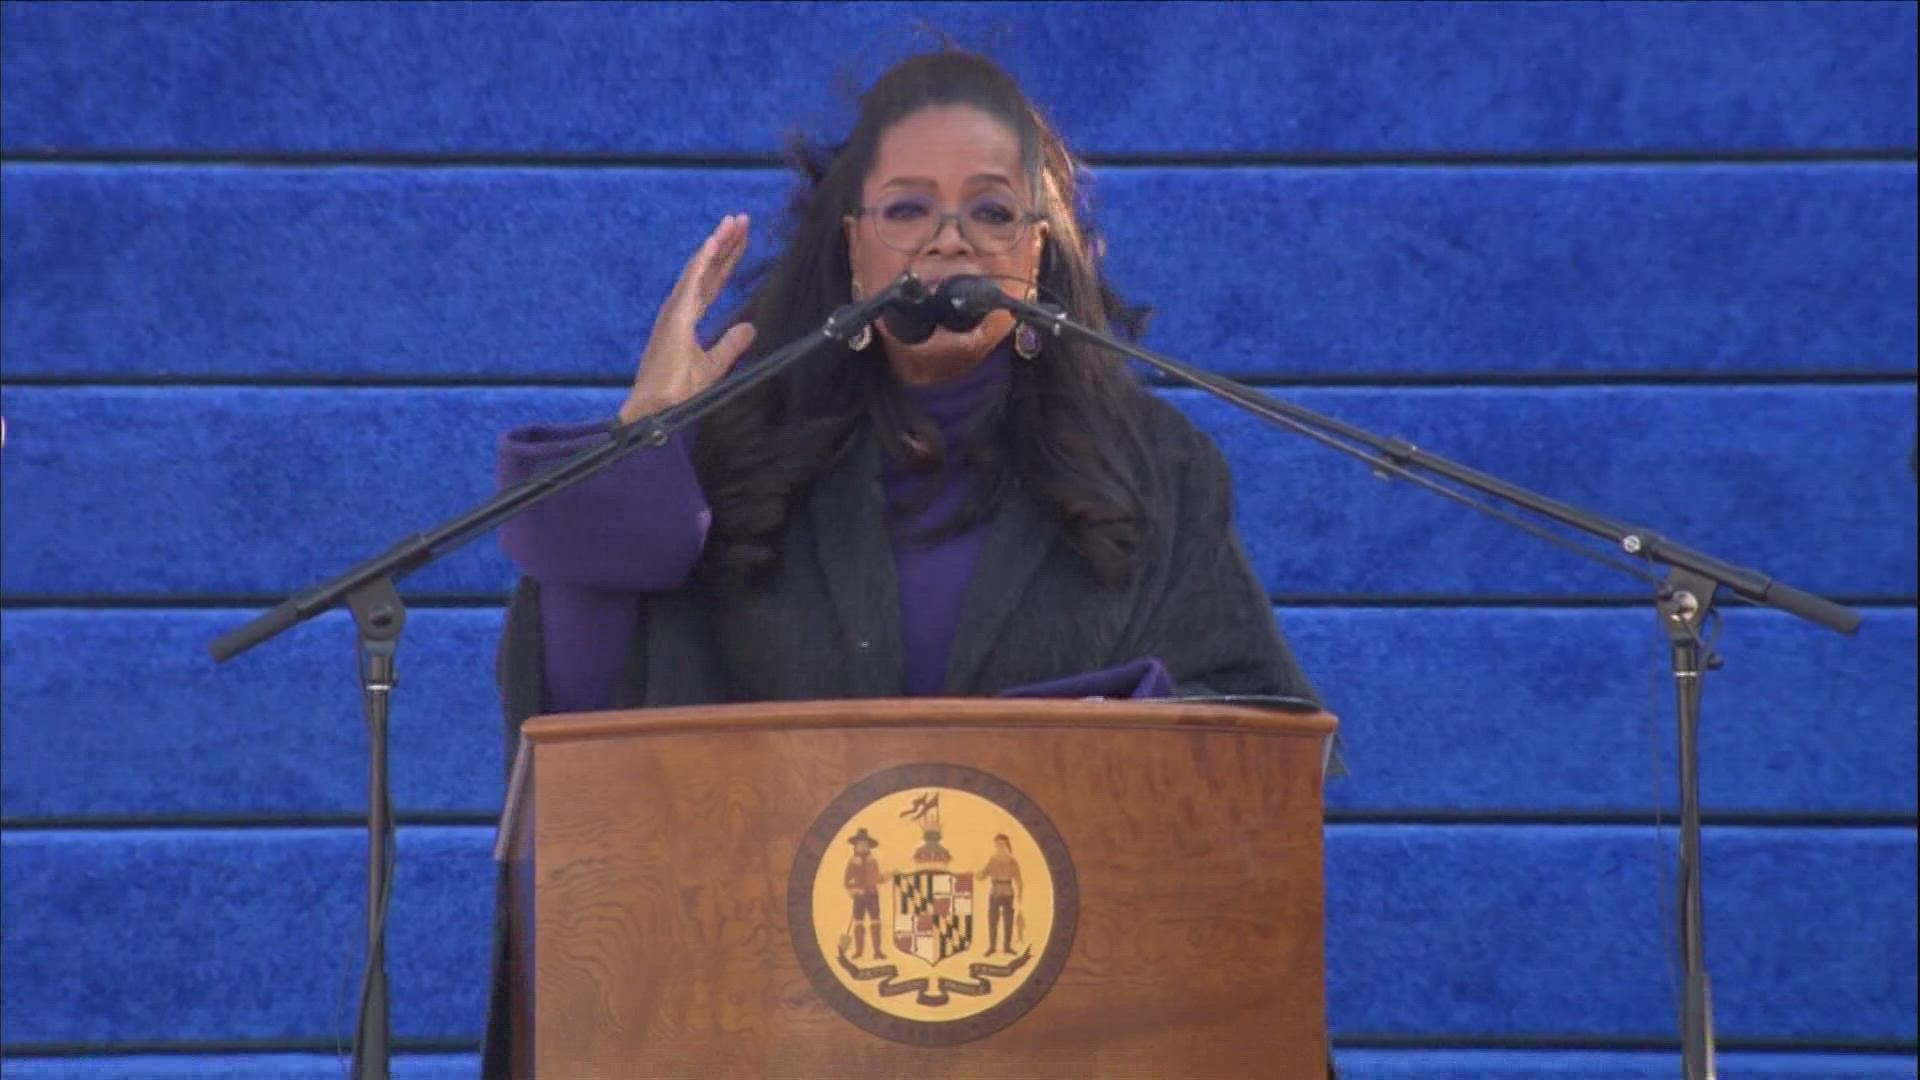 Oprah Winfrey speaks at Maryland governor Wes Moore's inauguration, only the third African-American to hold a governor’s seat in American history.